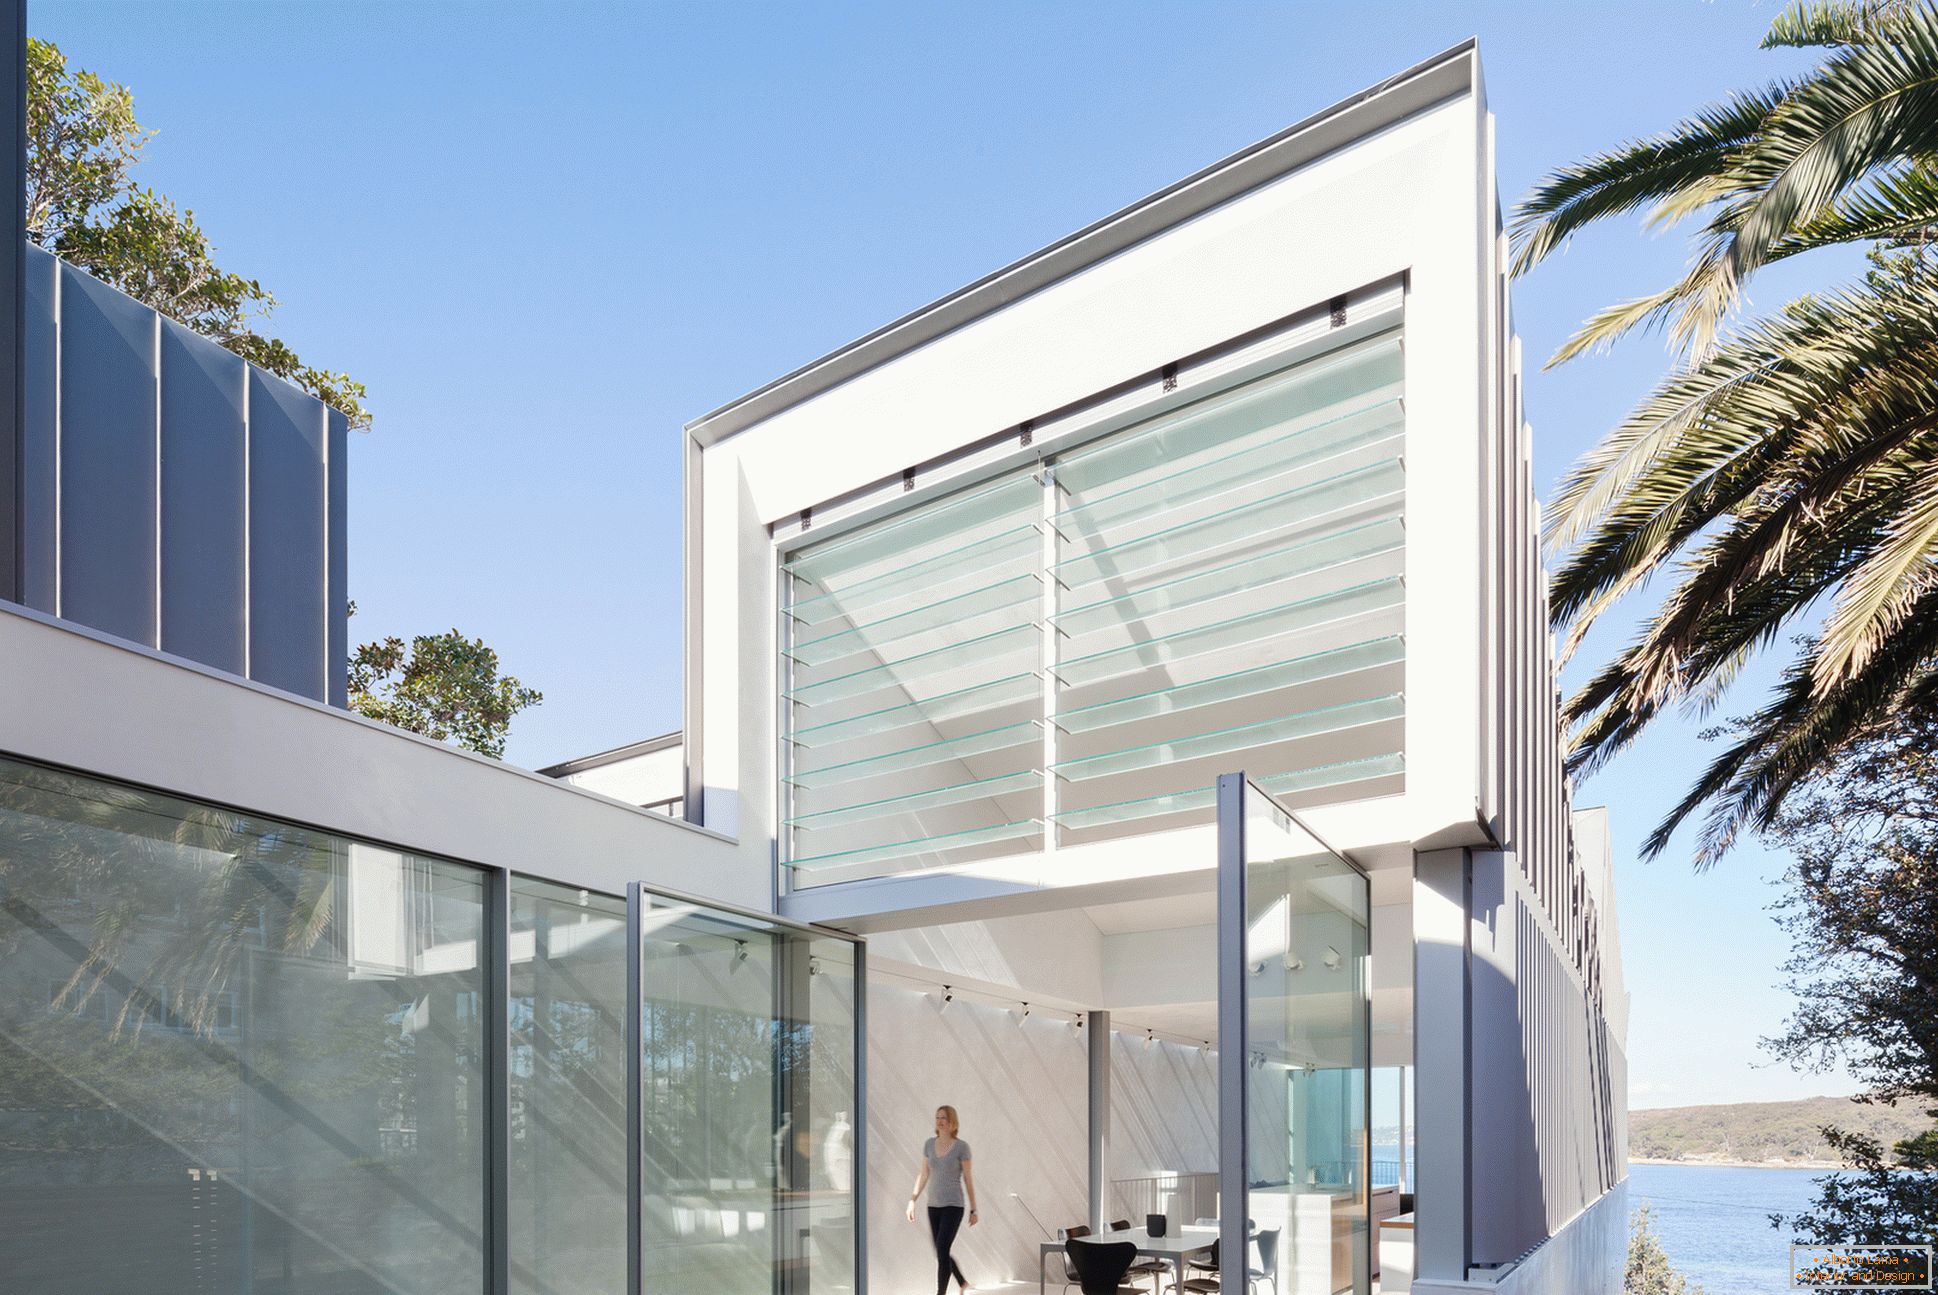 The project of a narrow two-story house in Australia